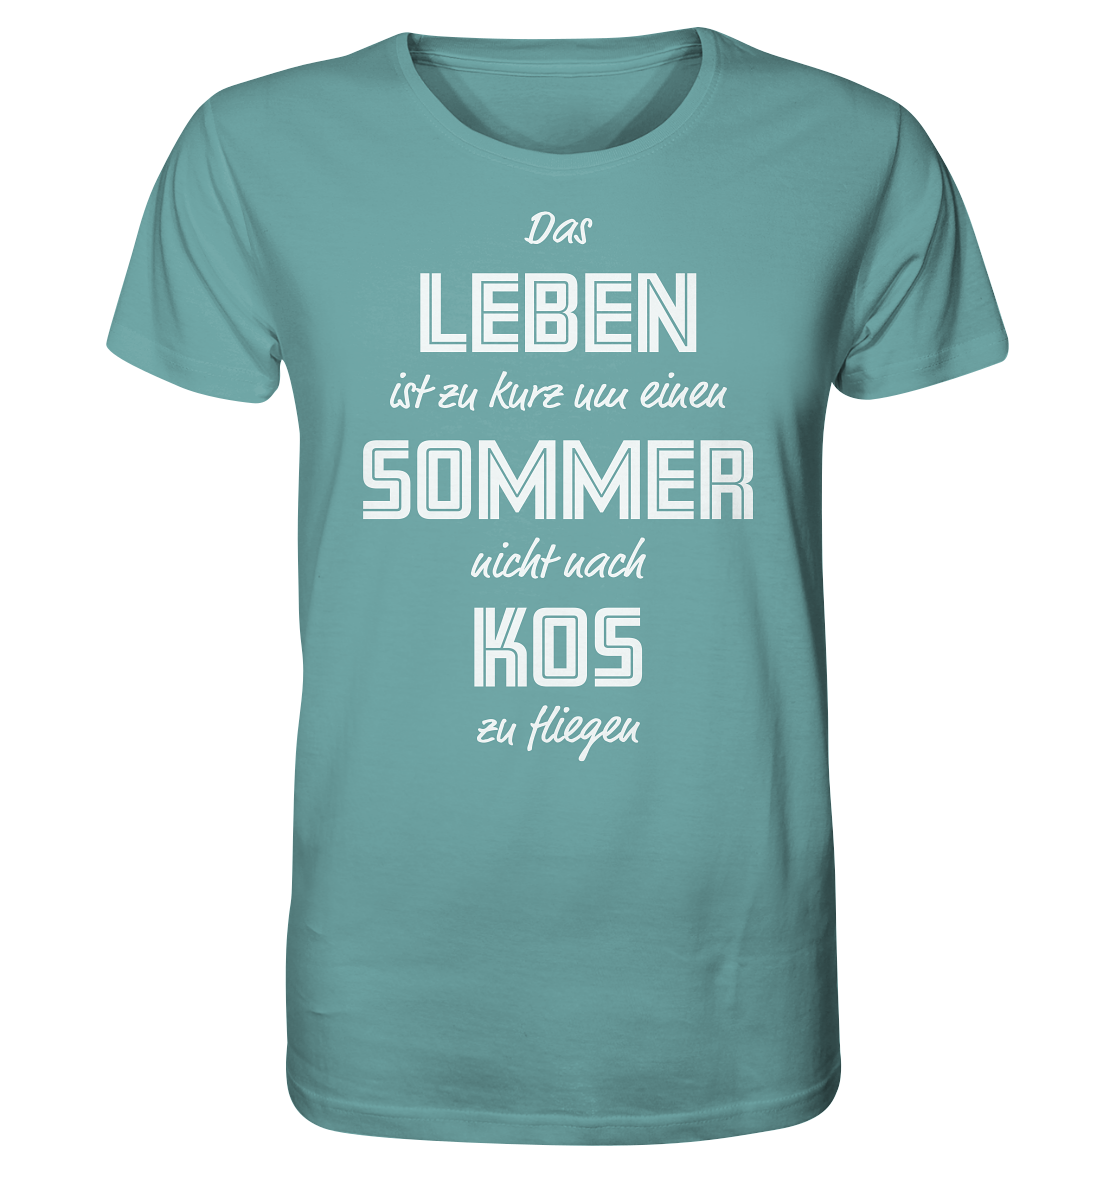 Life is too short not to fly to Kos for a summer - Organic Shirt